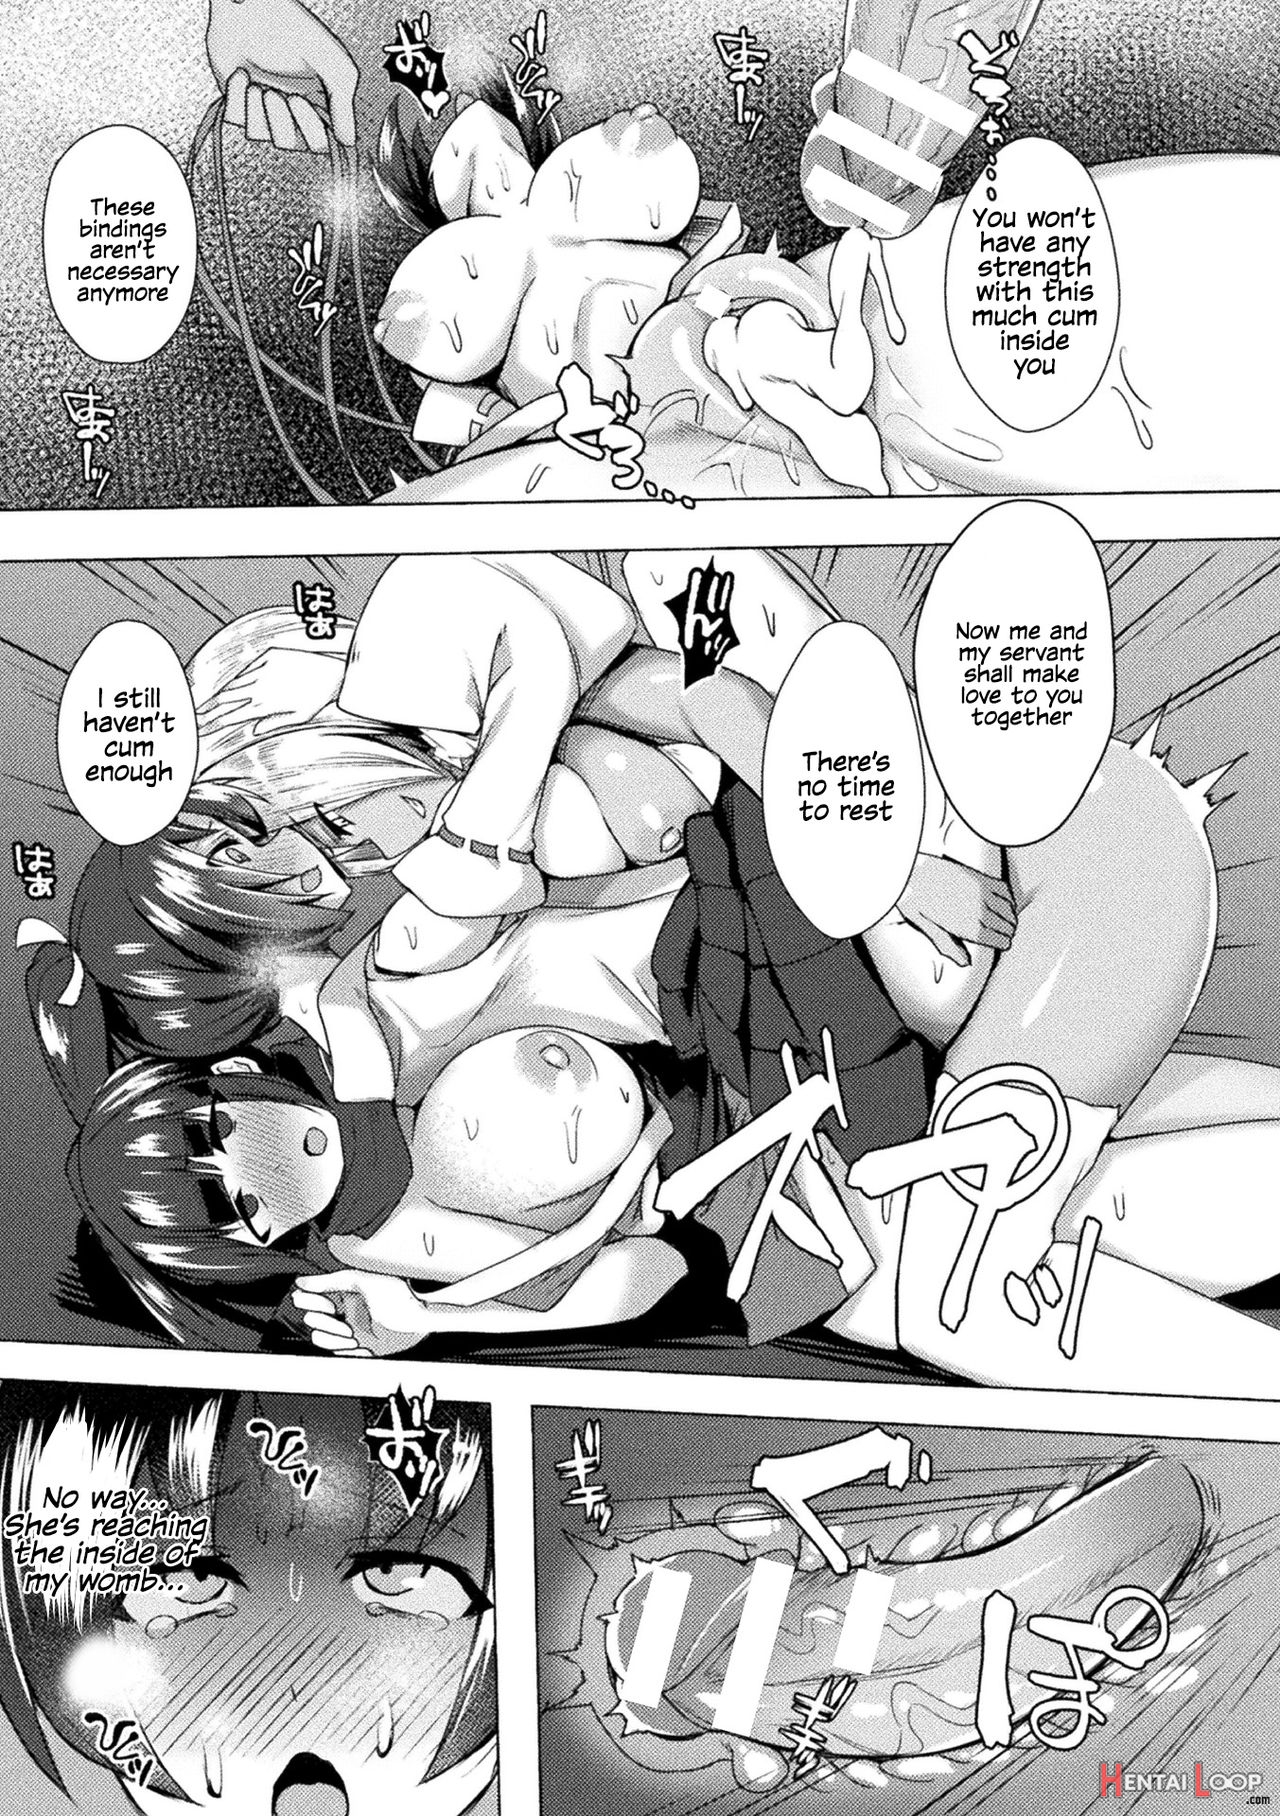 Futanari Girls Forcefully Impregnating Others With A Mating Press! Vol. 1 page 33